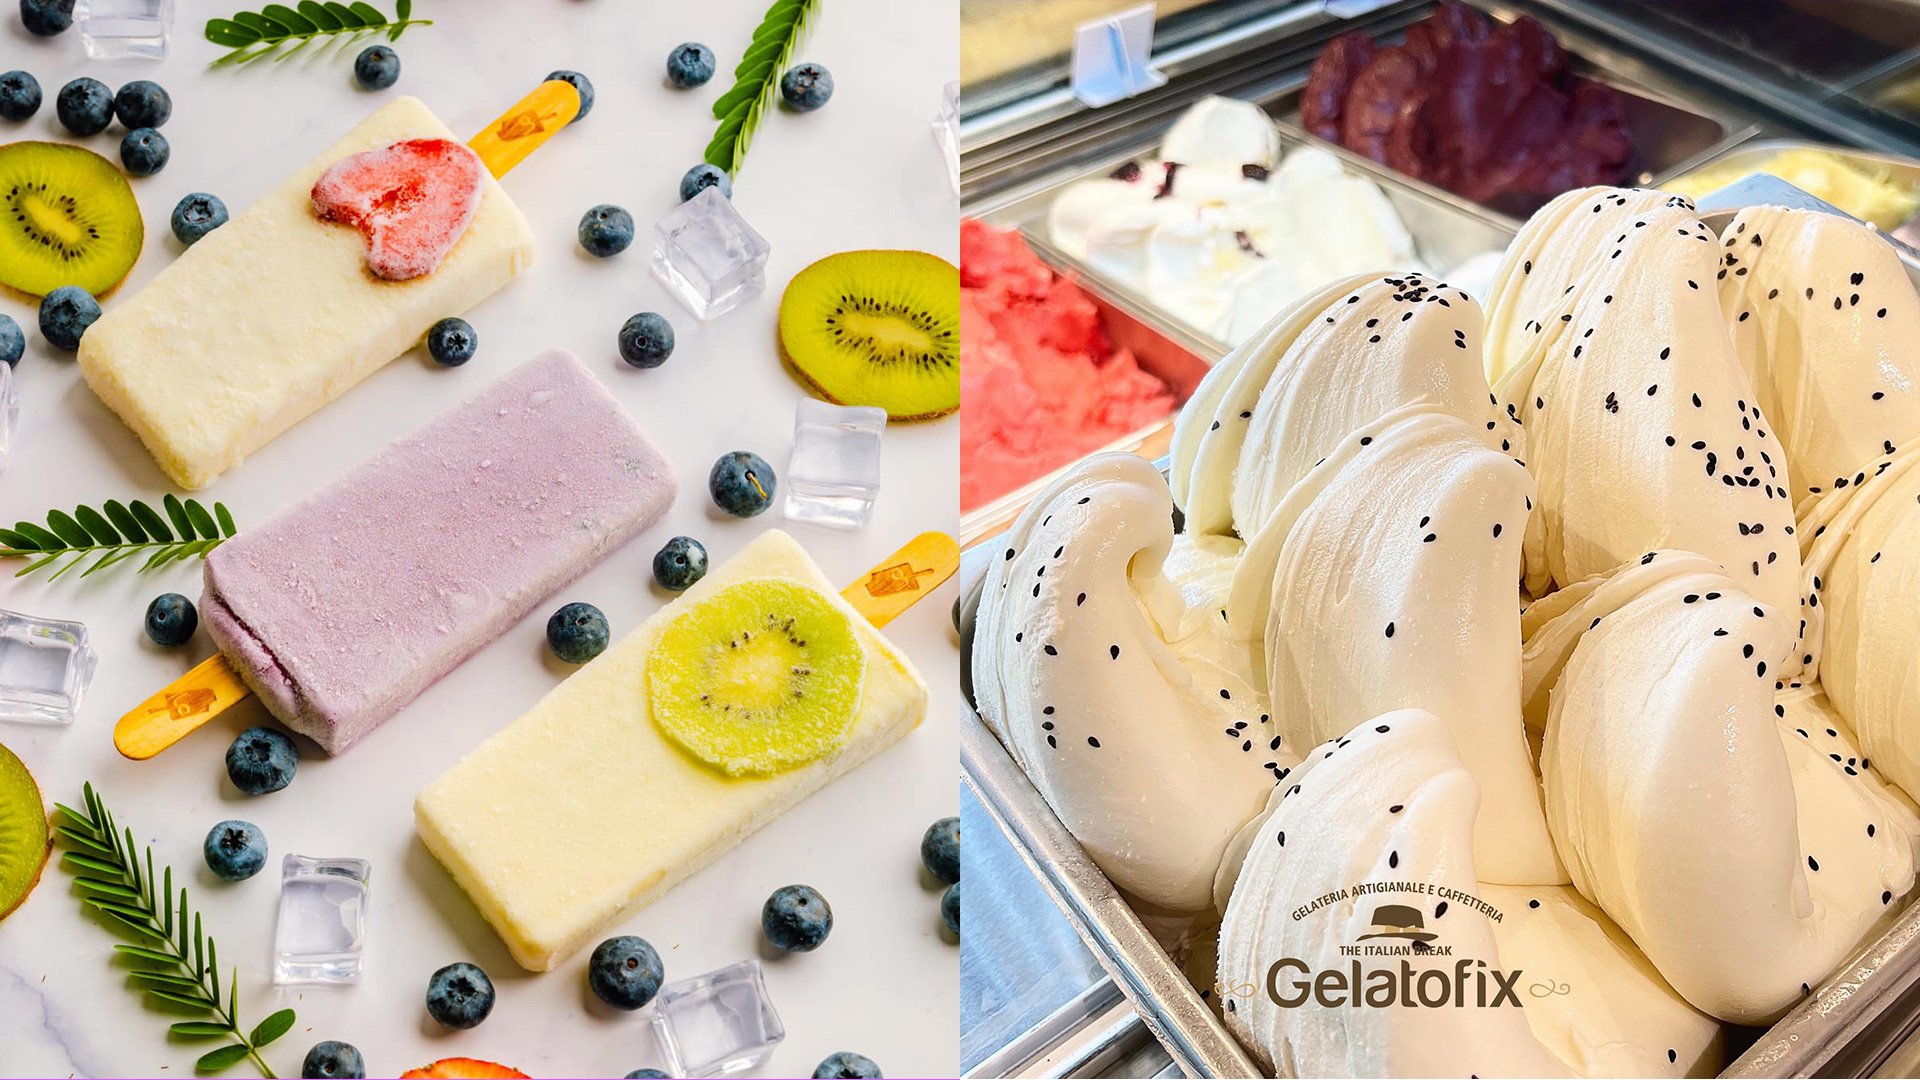 Looking for something cold to beat Cambodia's heat? Come to these 5 Gelato shops!